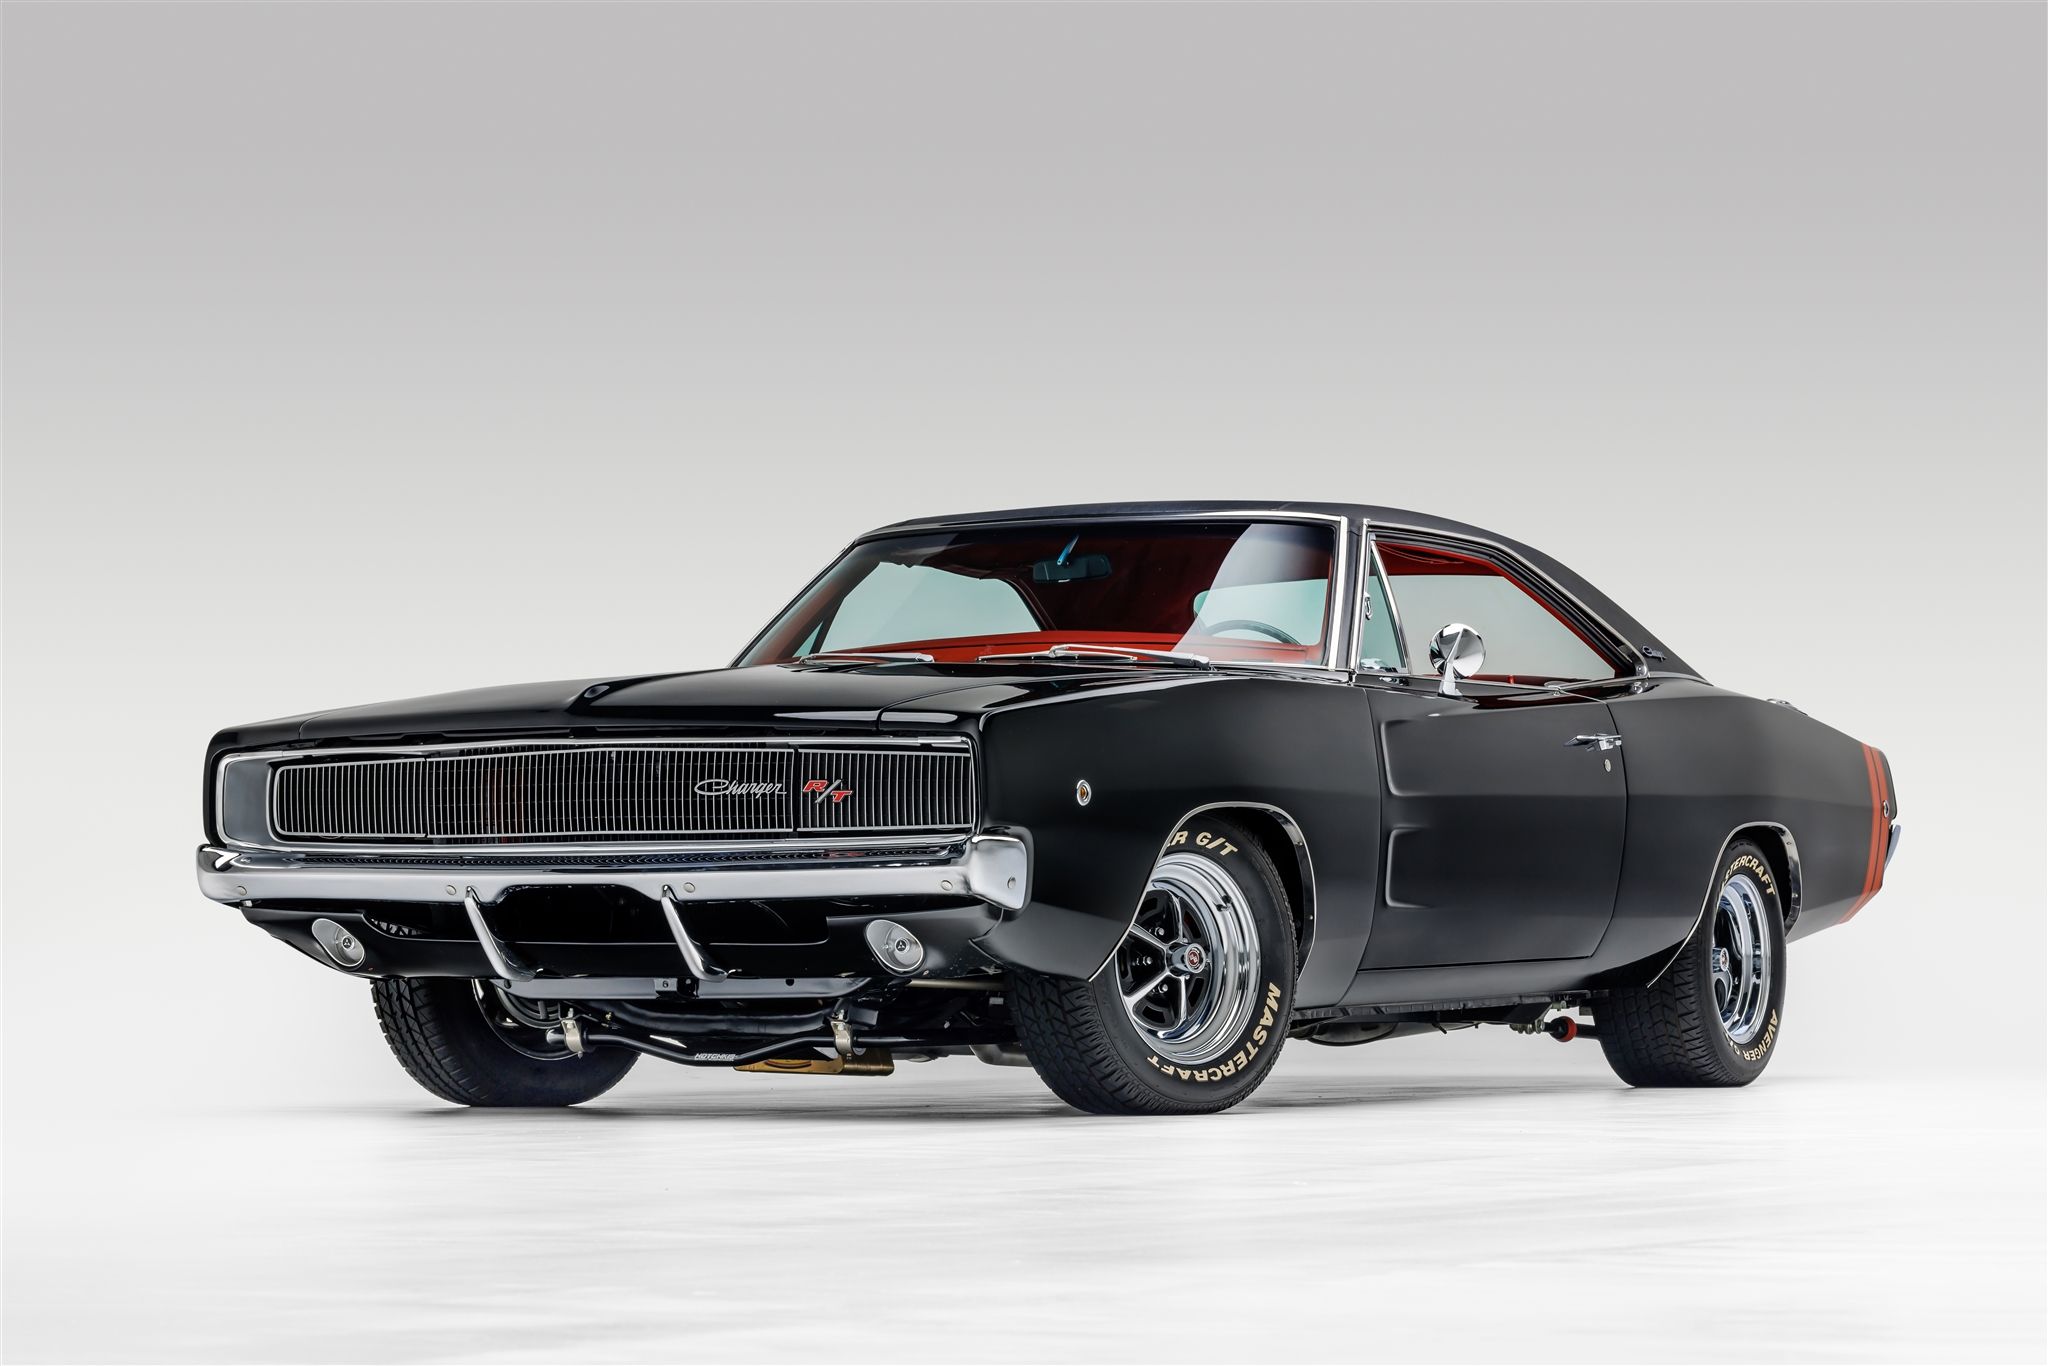 572 HEMI-Powered 1968 Dodge Charger R/T Is Thoroughbred Detroit Muscle -  autoevolution